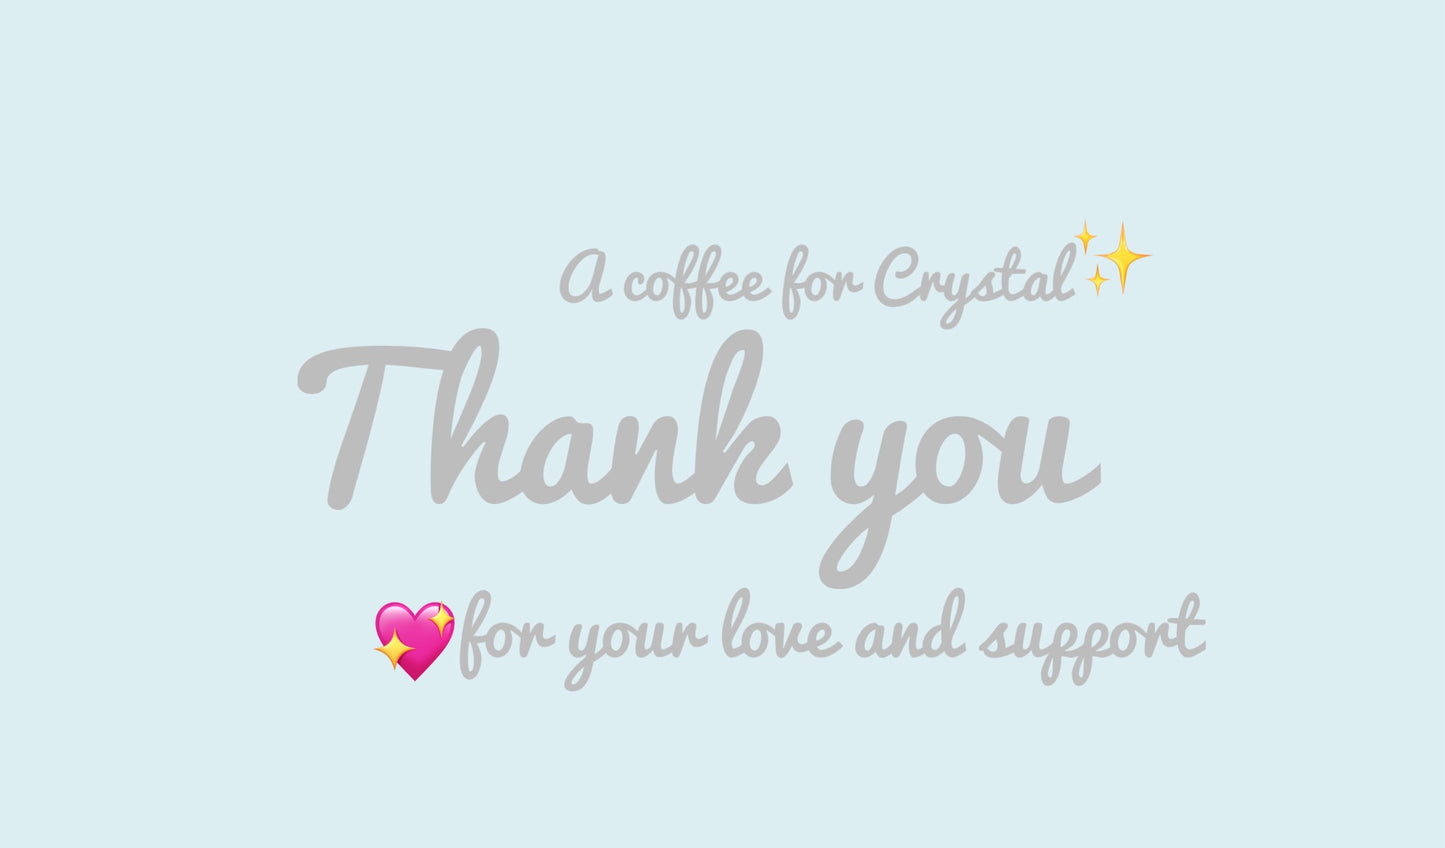 a coffee for Crystal✨